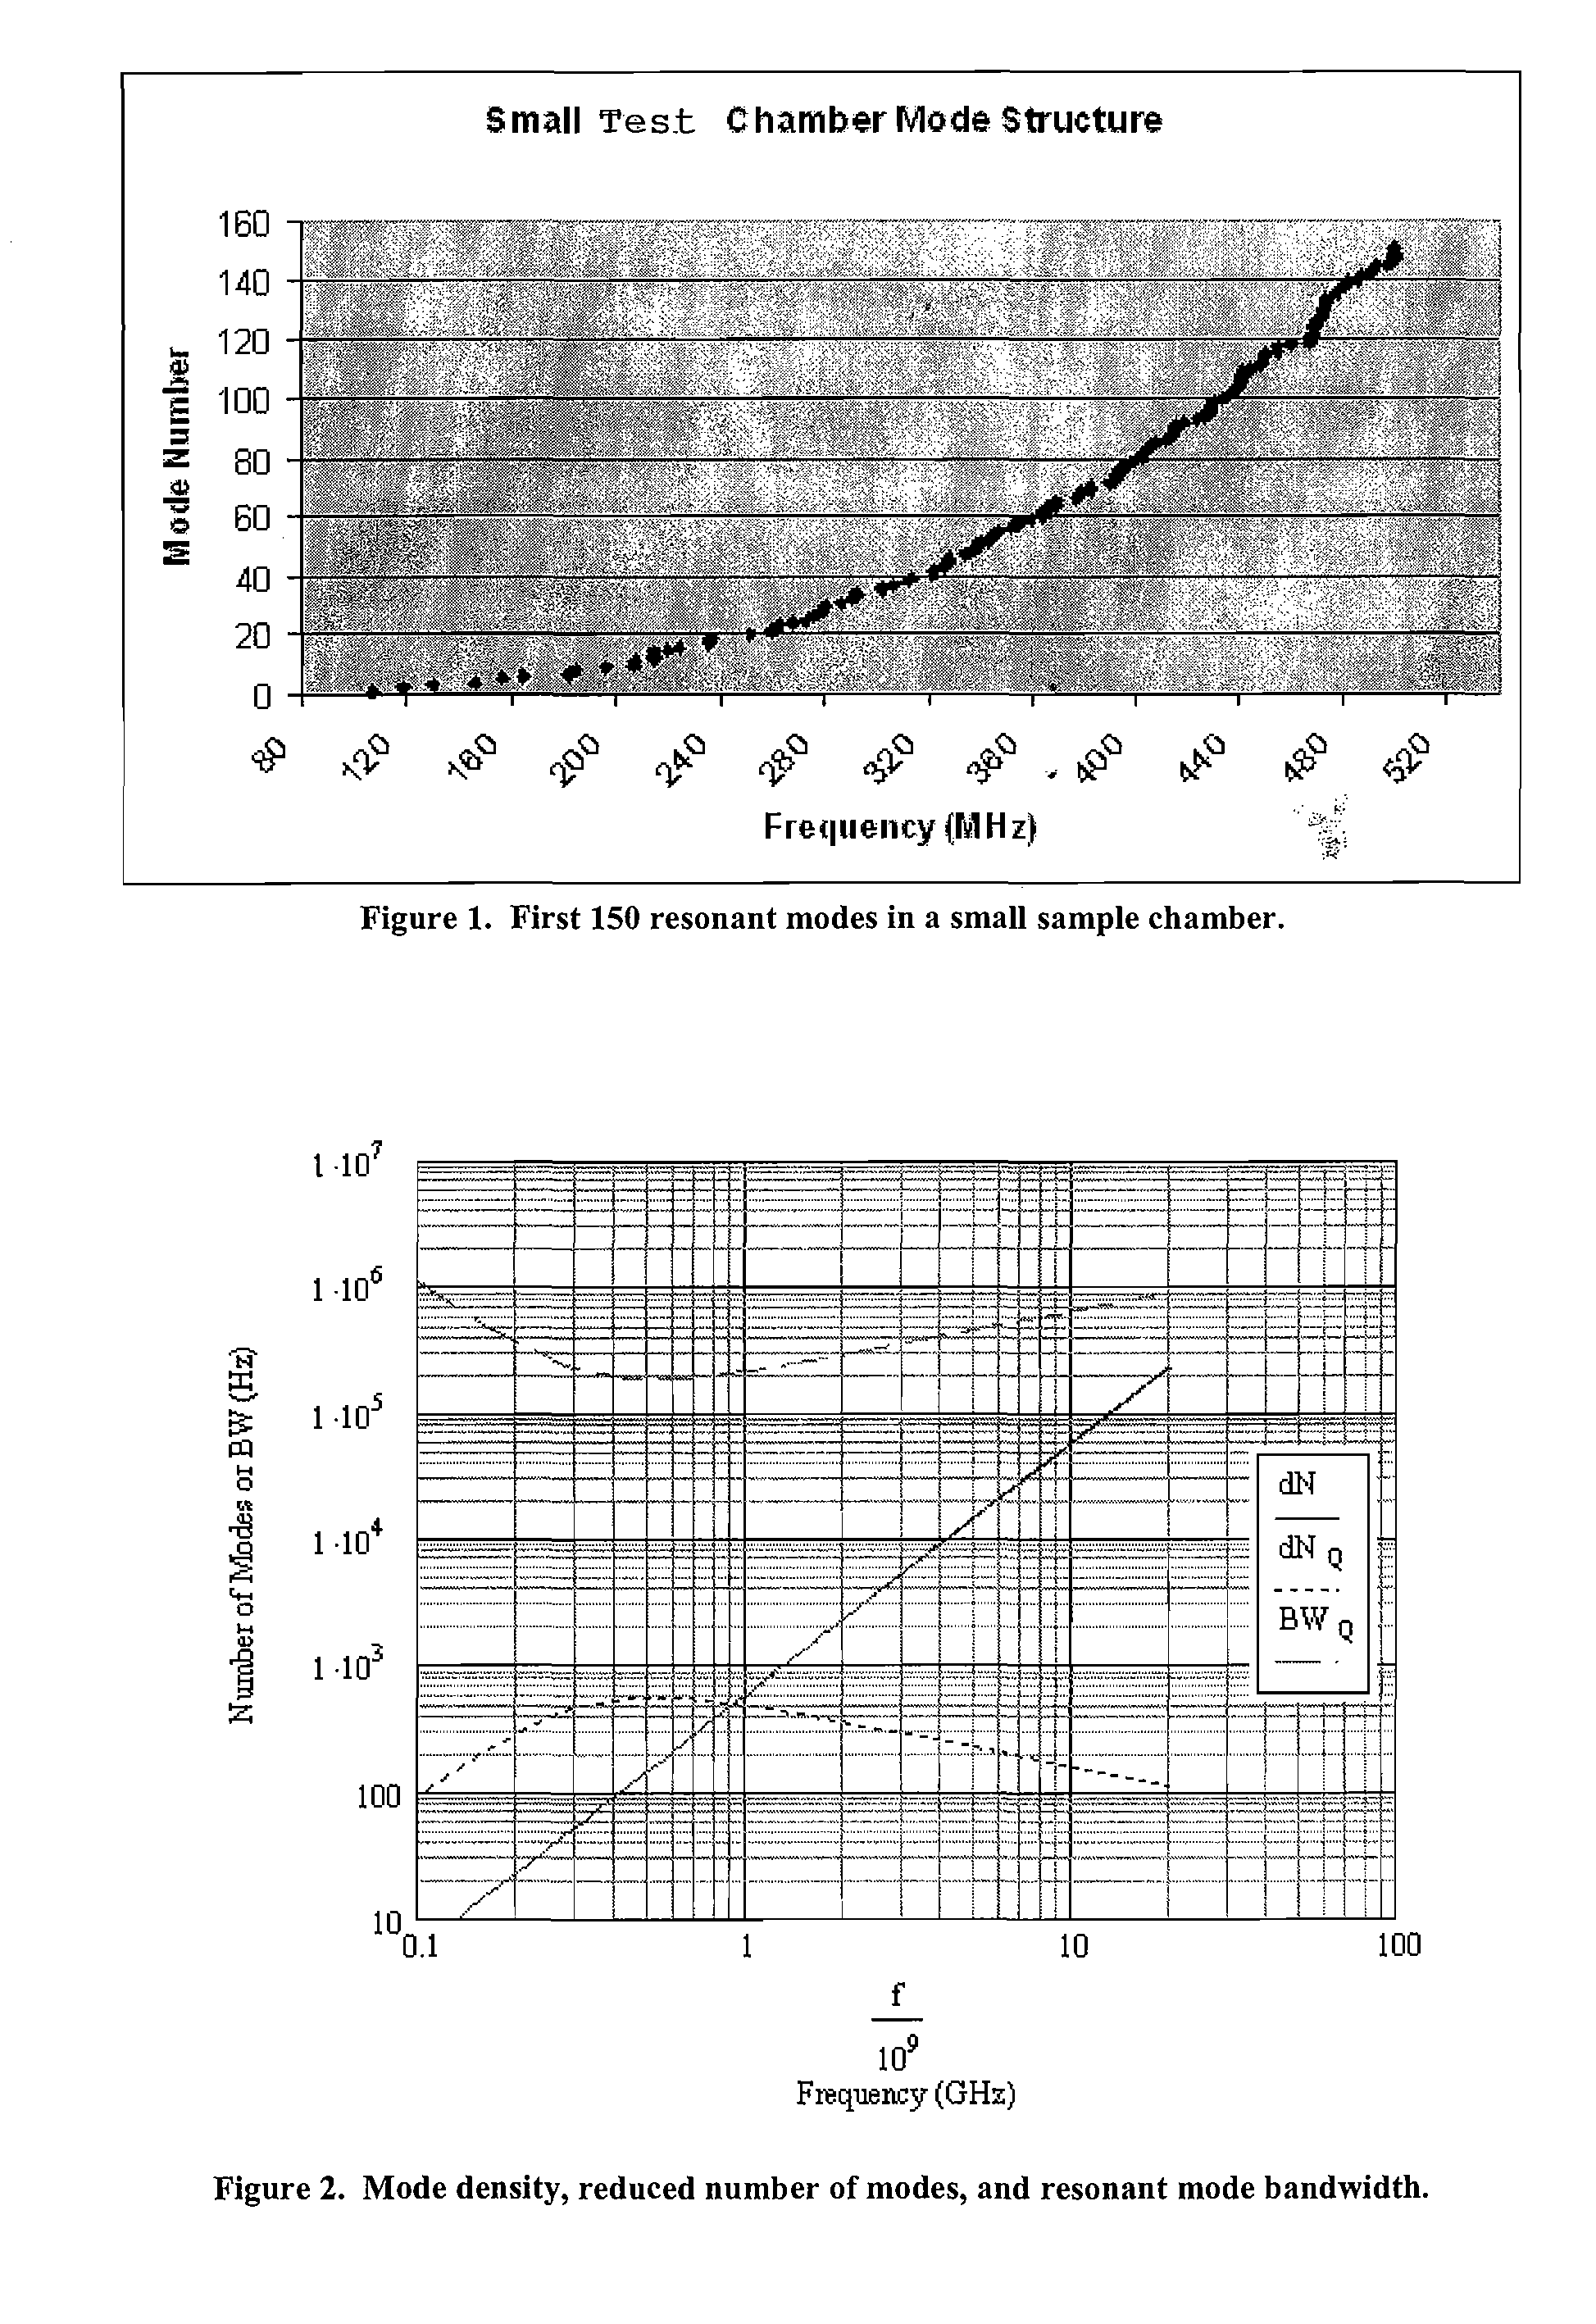 Electromagnetic testing of an enclosure or cavity using a discrete frequency stir method